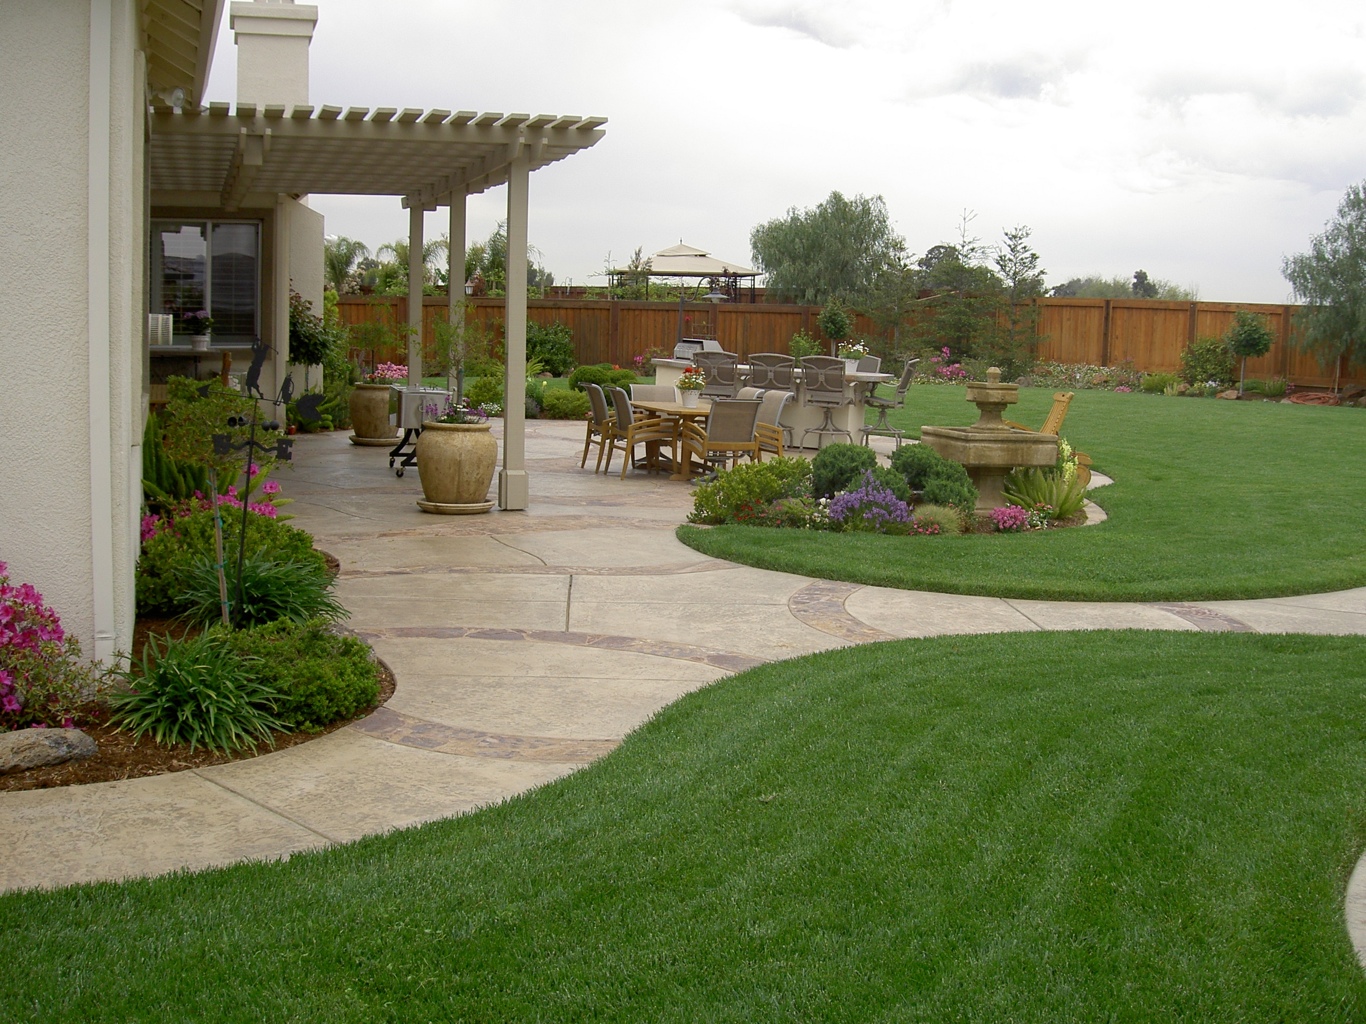 Better Looking with Backyard Landscaping Ideas - Interior ...